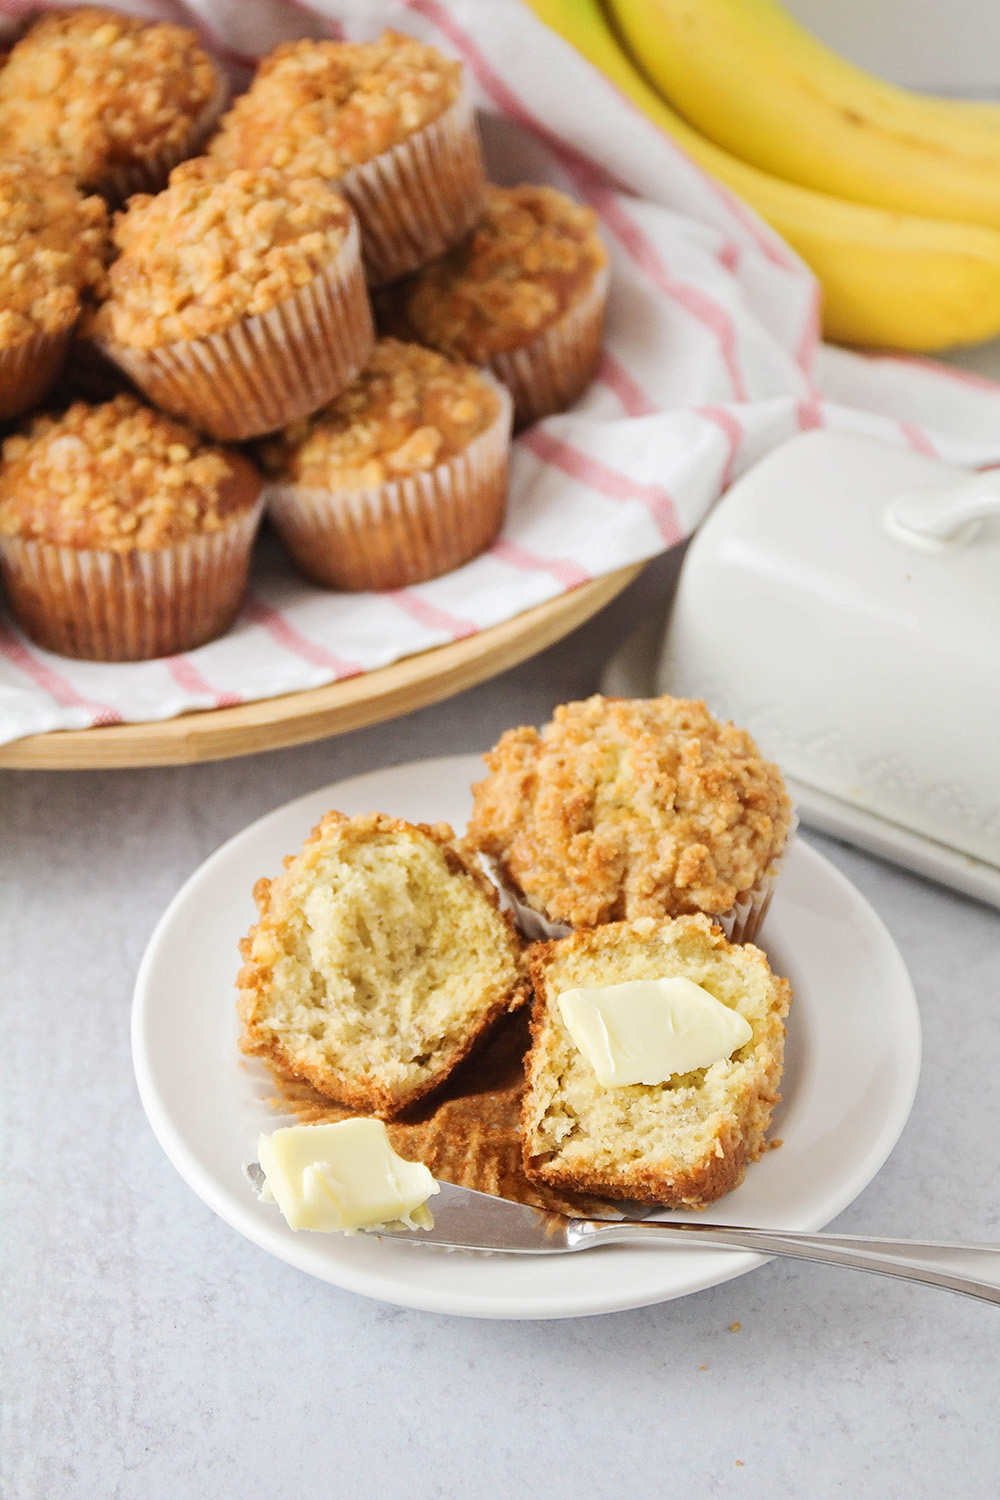 Banana Streusel Muffins - The Baker Upstairs